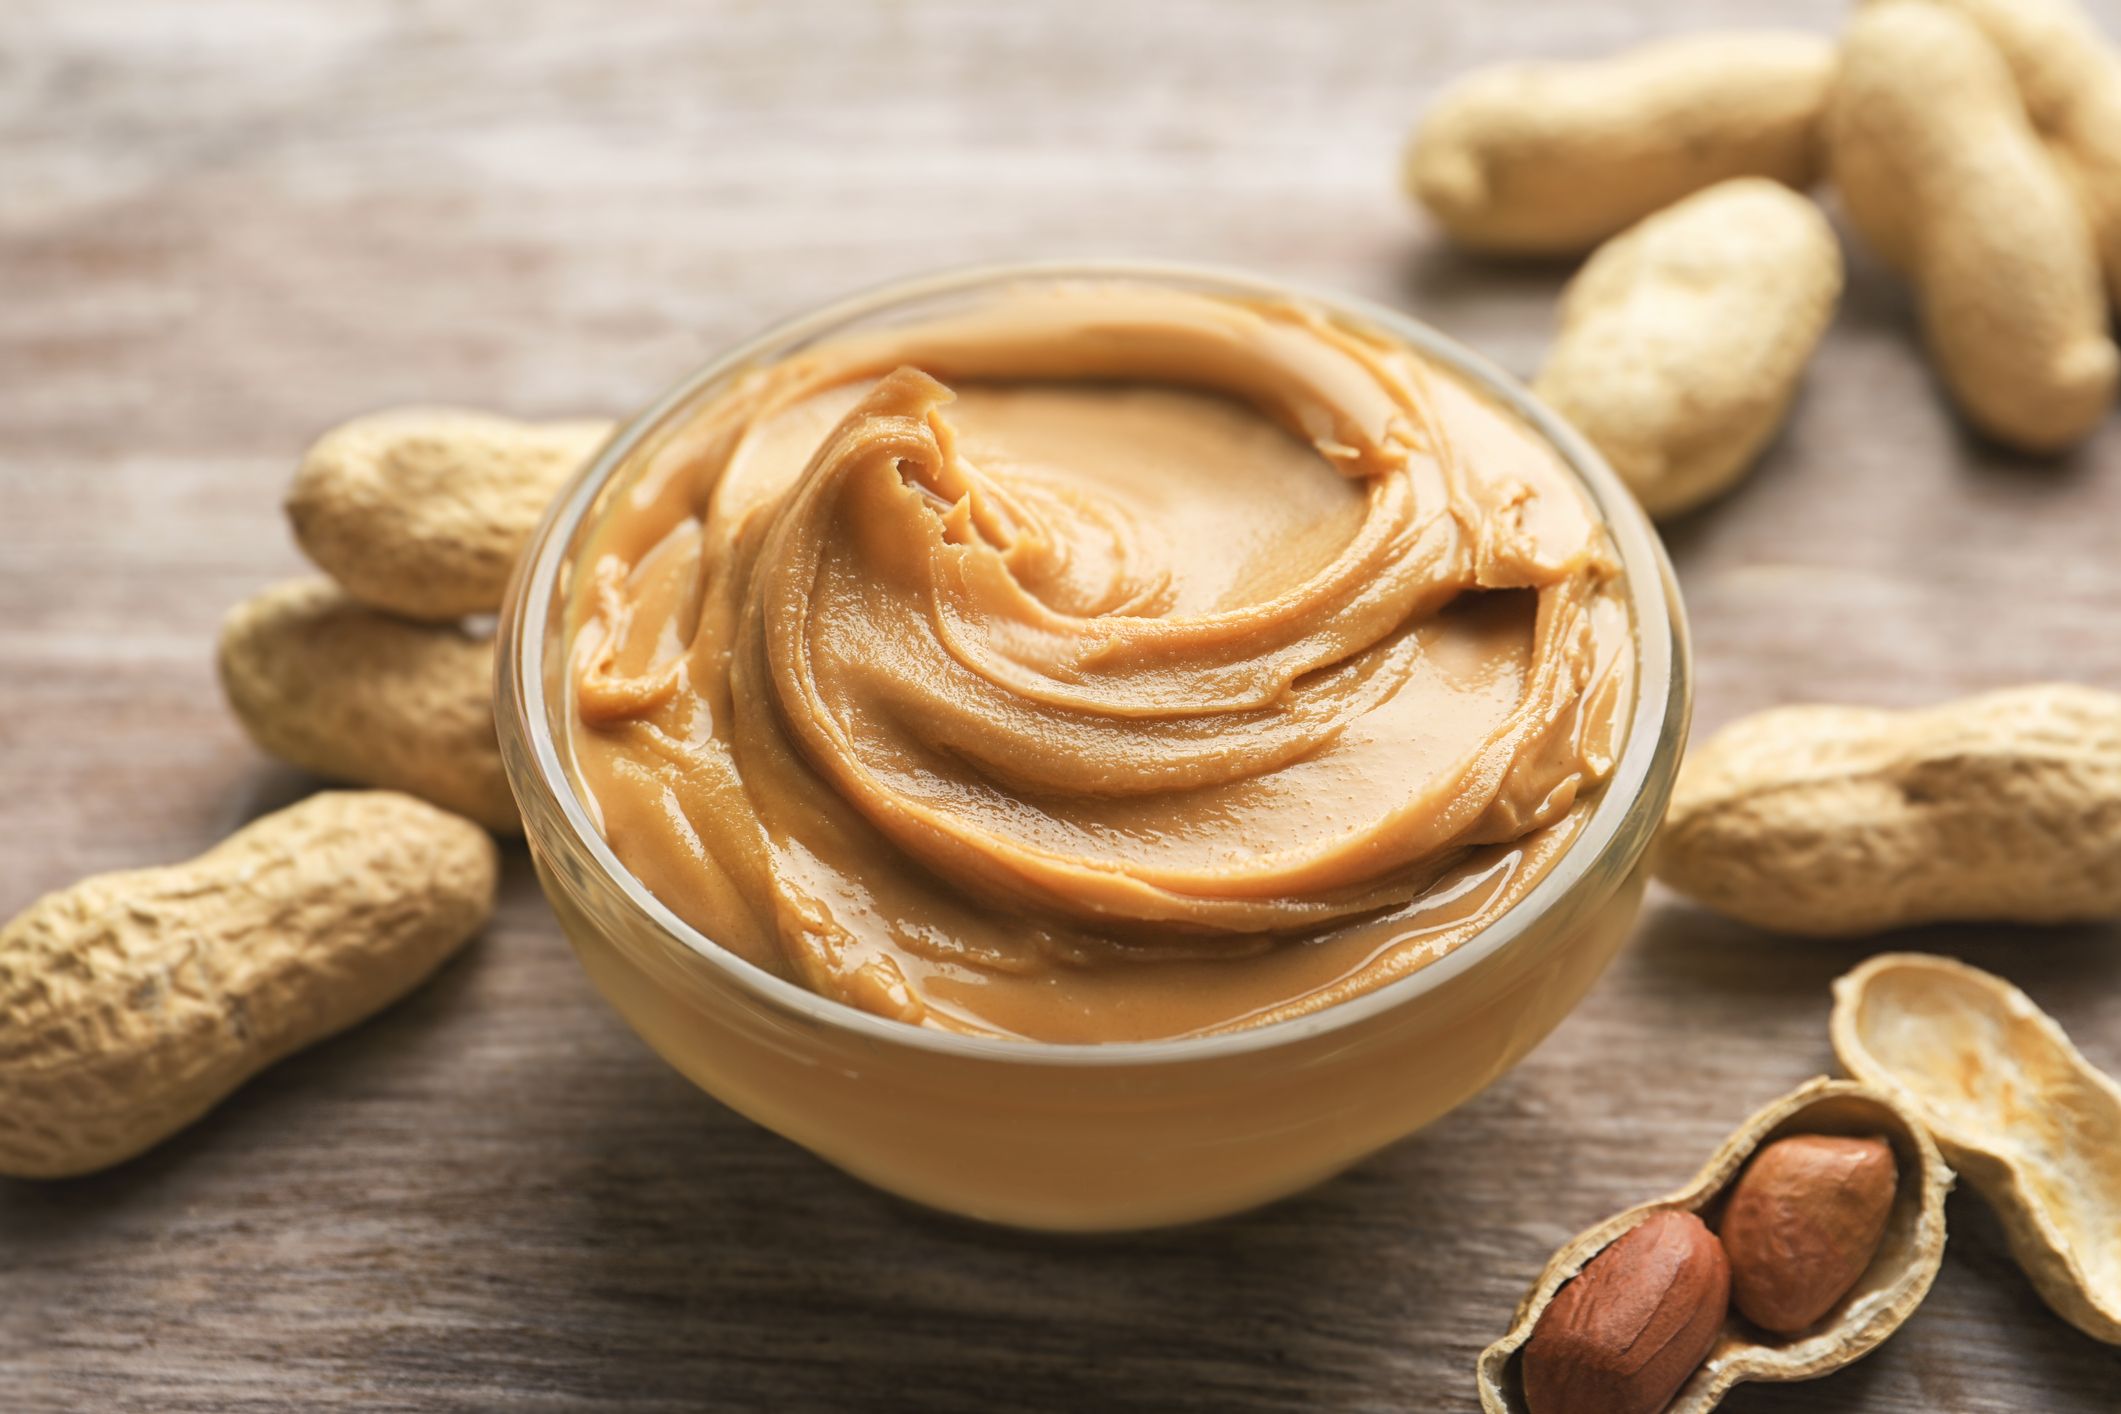 Can I get money back for recalled peanut butter?